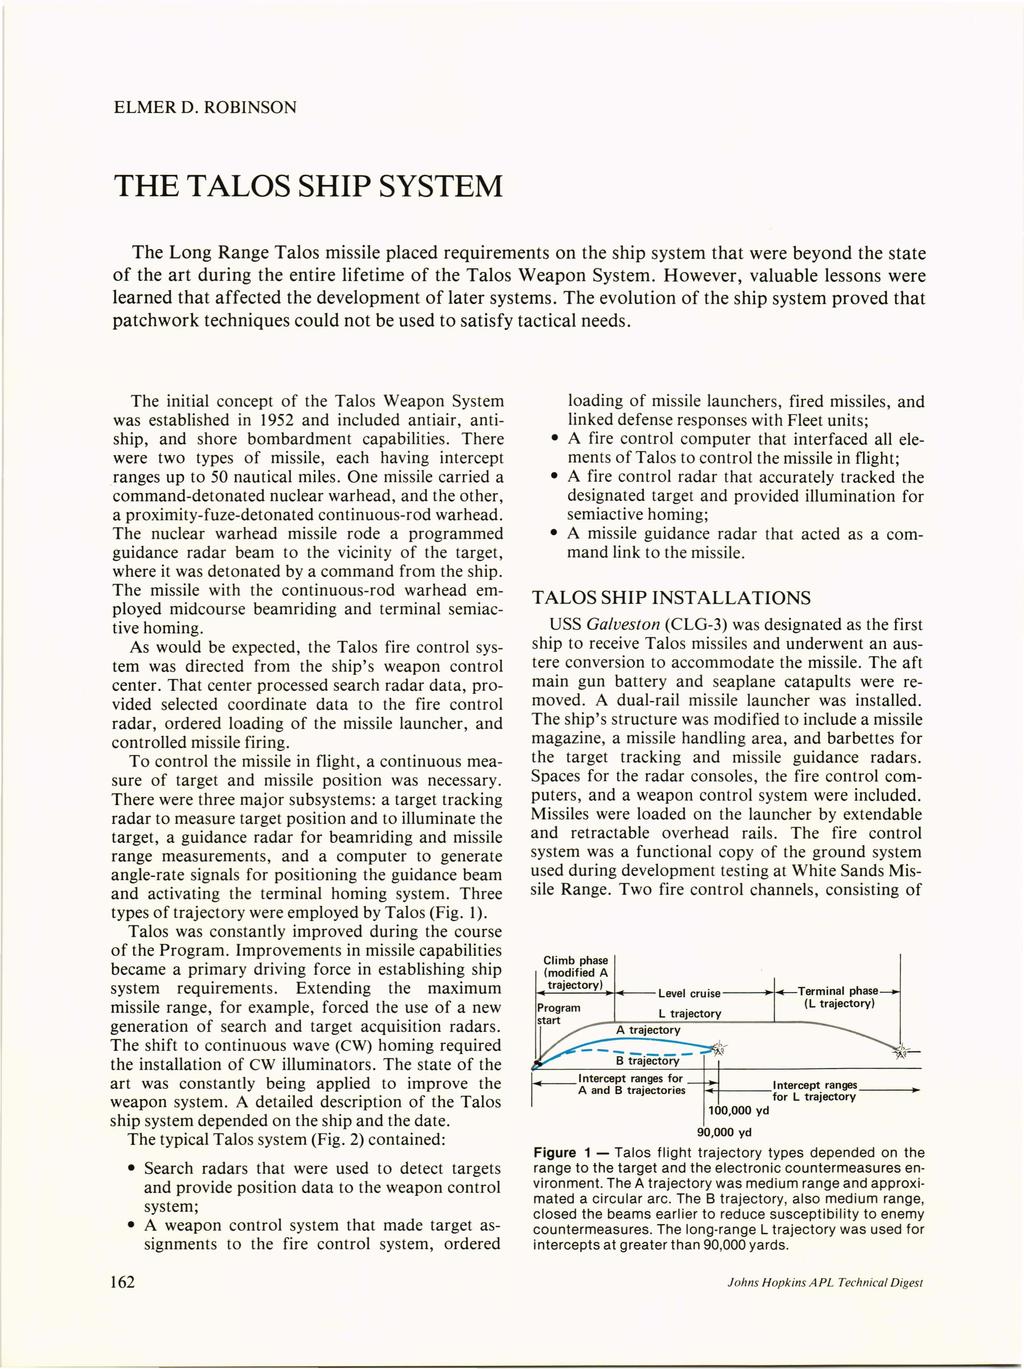 ELMER D. ROBINSON THE TALOS SHIP SYSTEM The Long Range Talos missile placed requirements on the ship system that were beyond the state of the art during the entire lifetime of the Talos Weapon System.